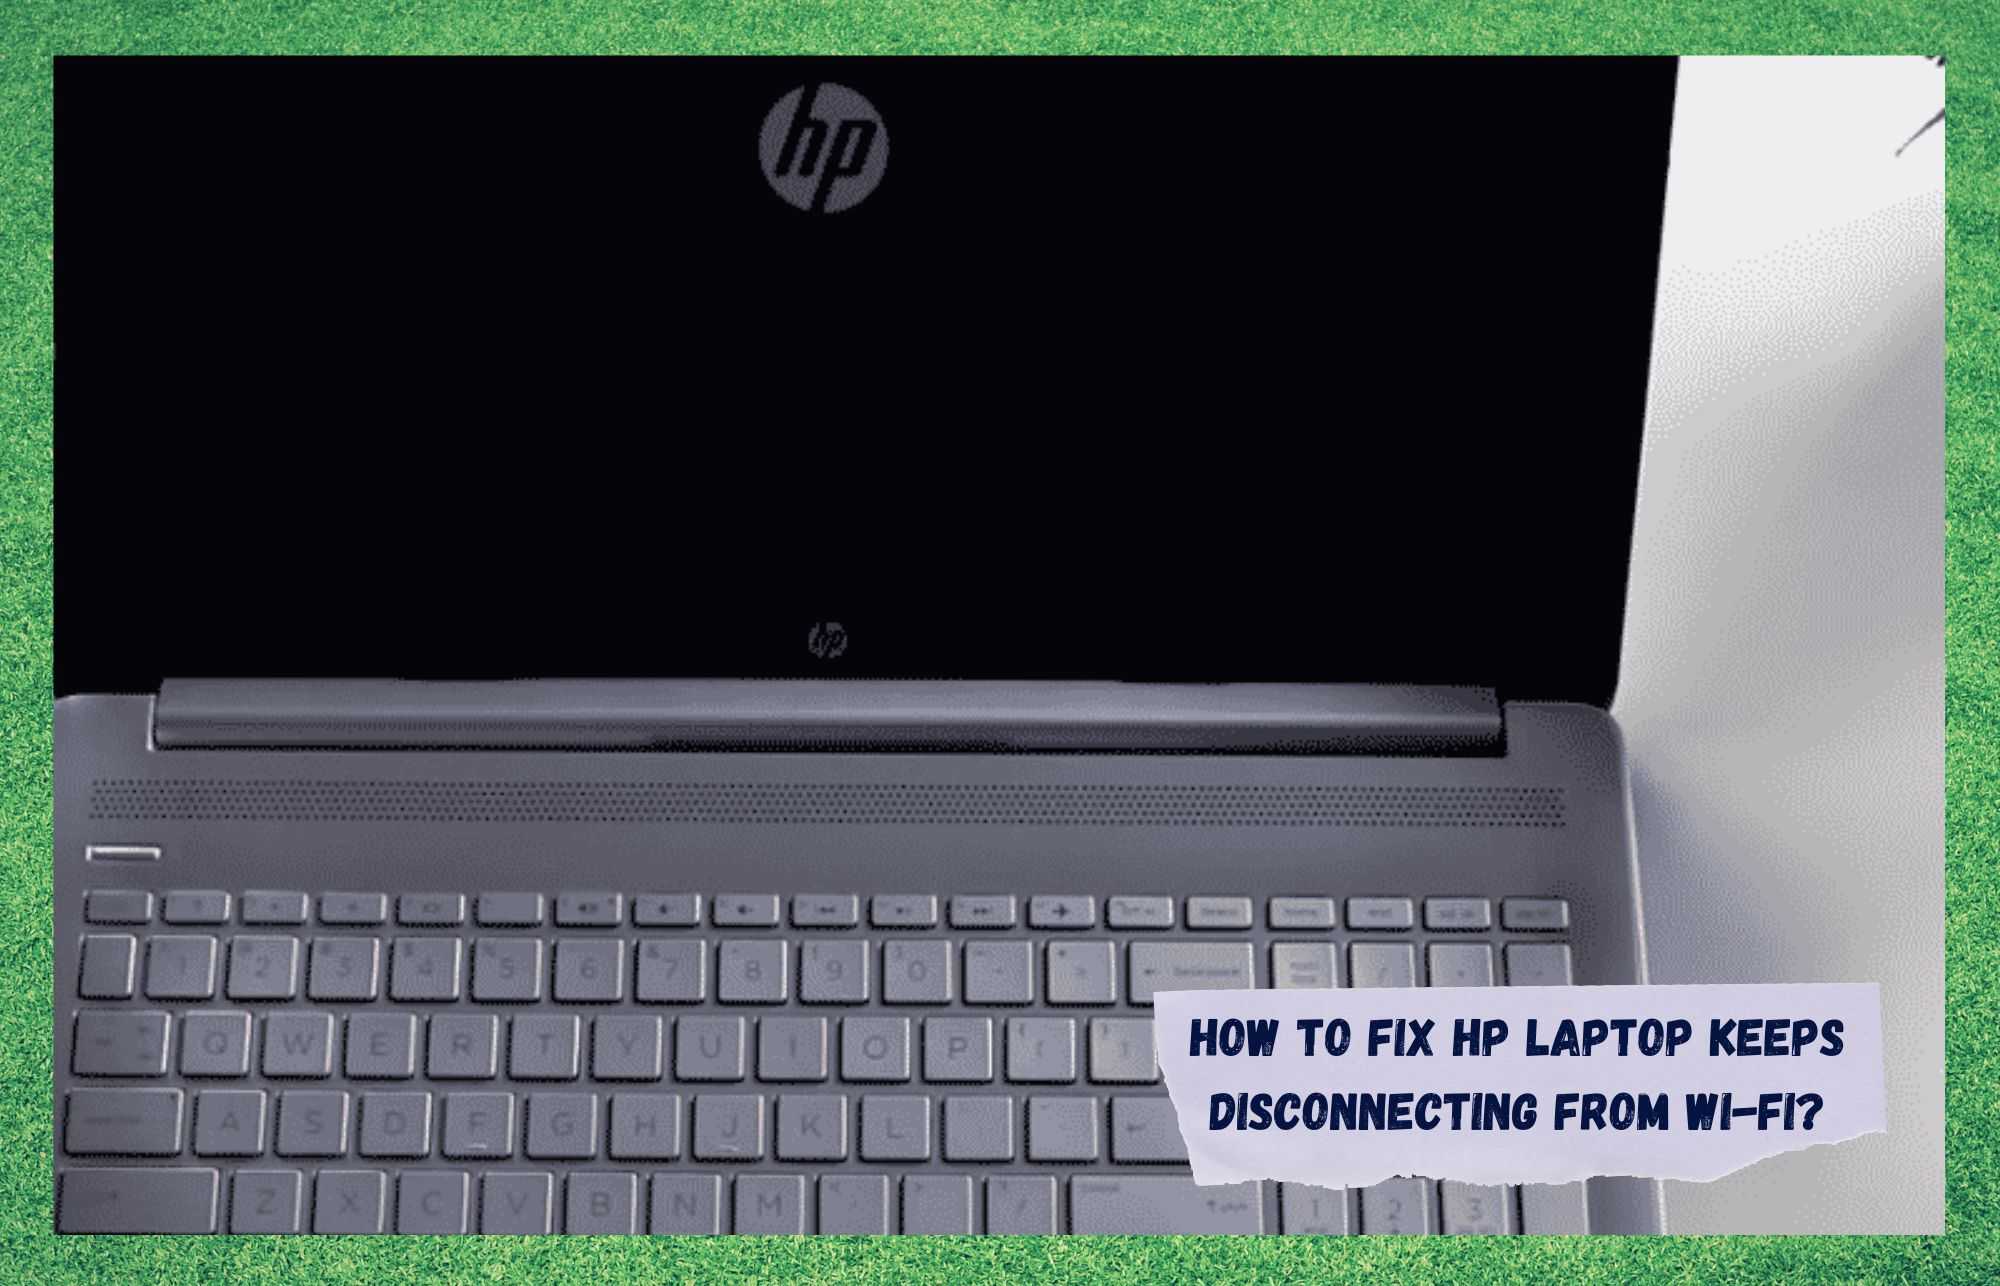 hp laptop keeps disconnecting from wifi